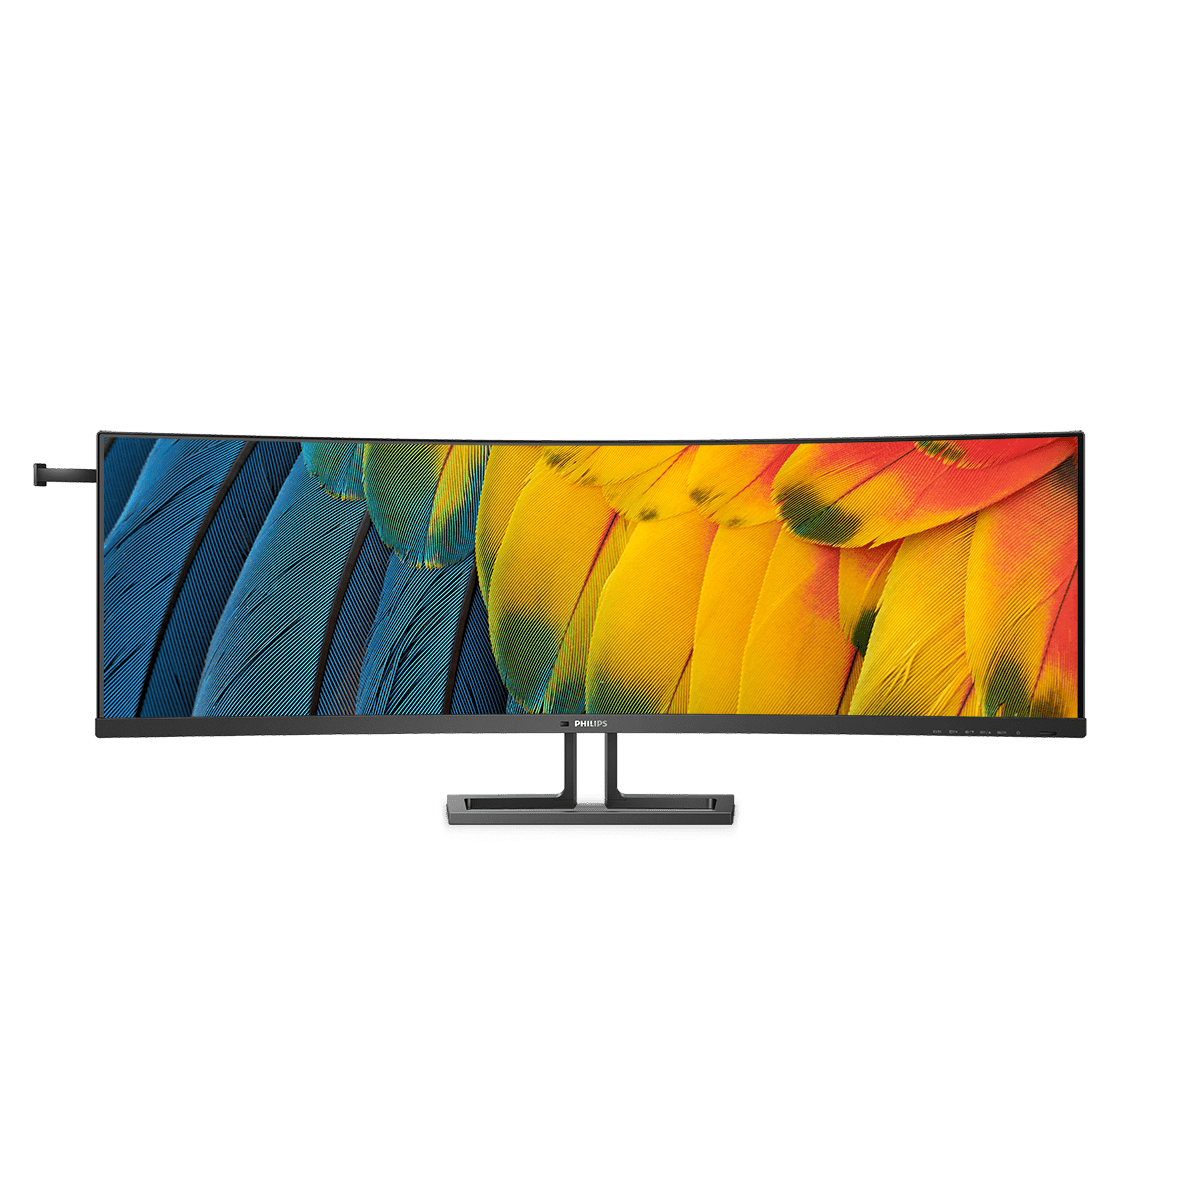 The new Philips SuperWide 45B1U6900C monitor aims to replace dual screens